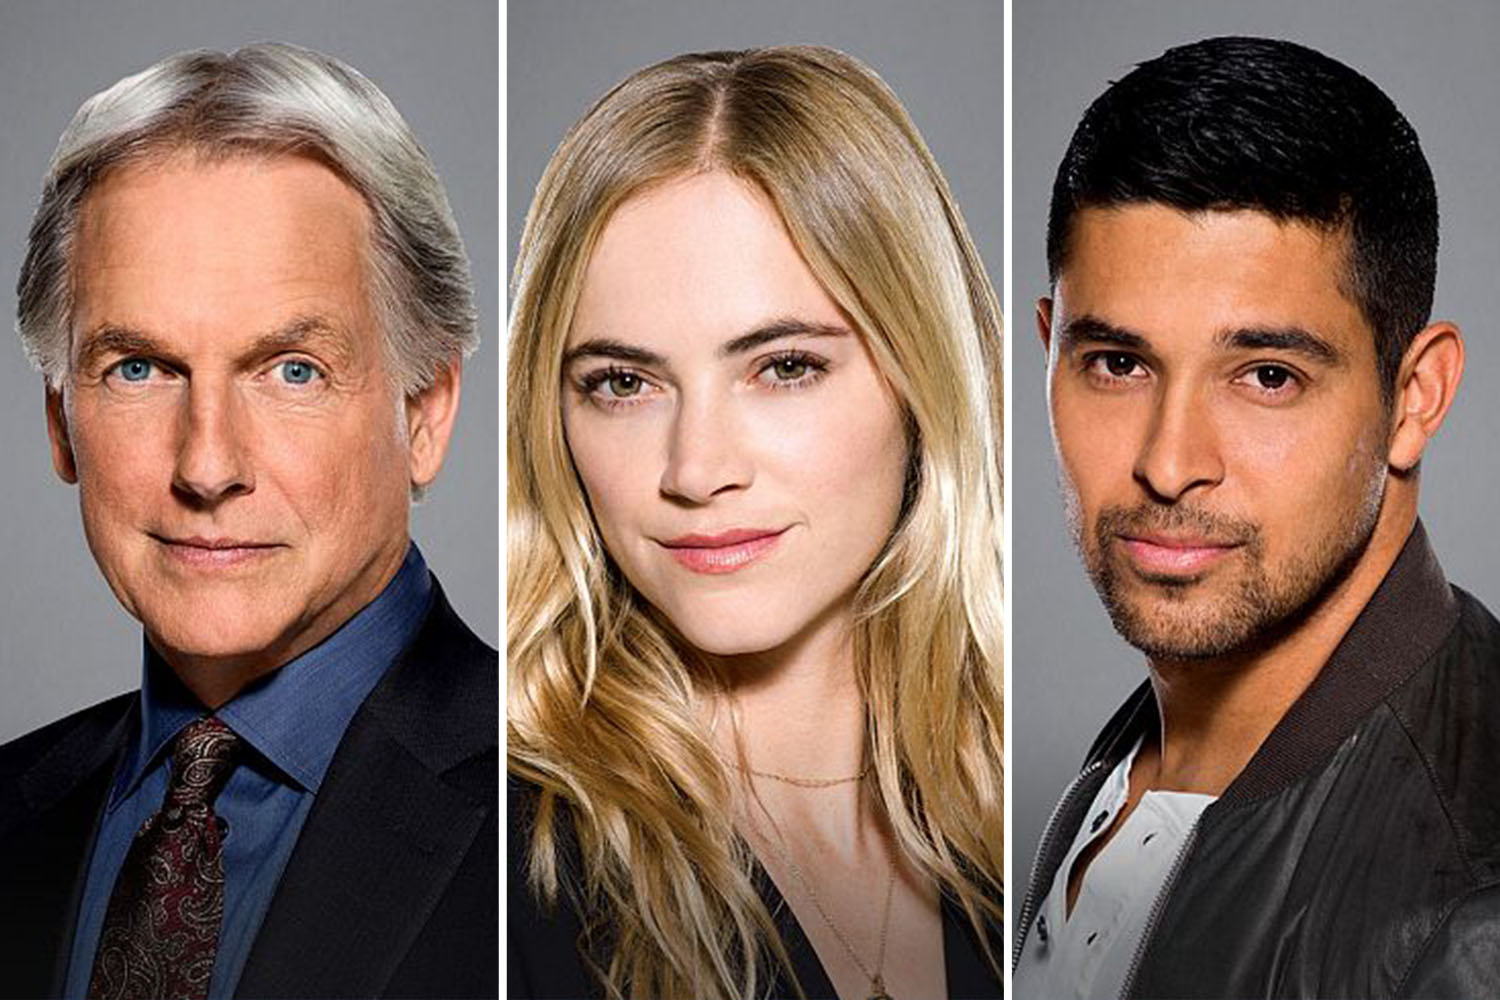 Inside Look What's New in NCIS Season 21 - Cast Updates, Episode Sneak Peeks, and Monday Premiere Dates--